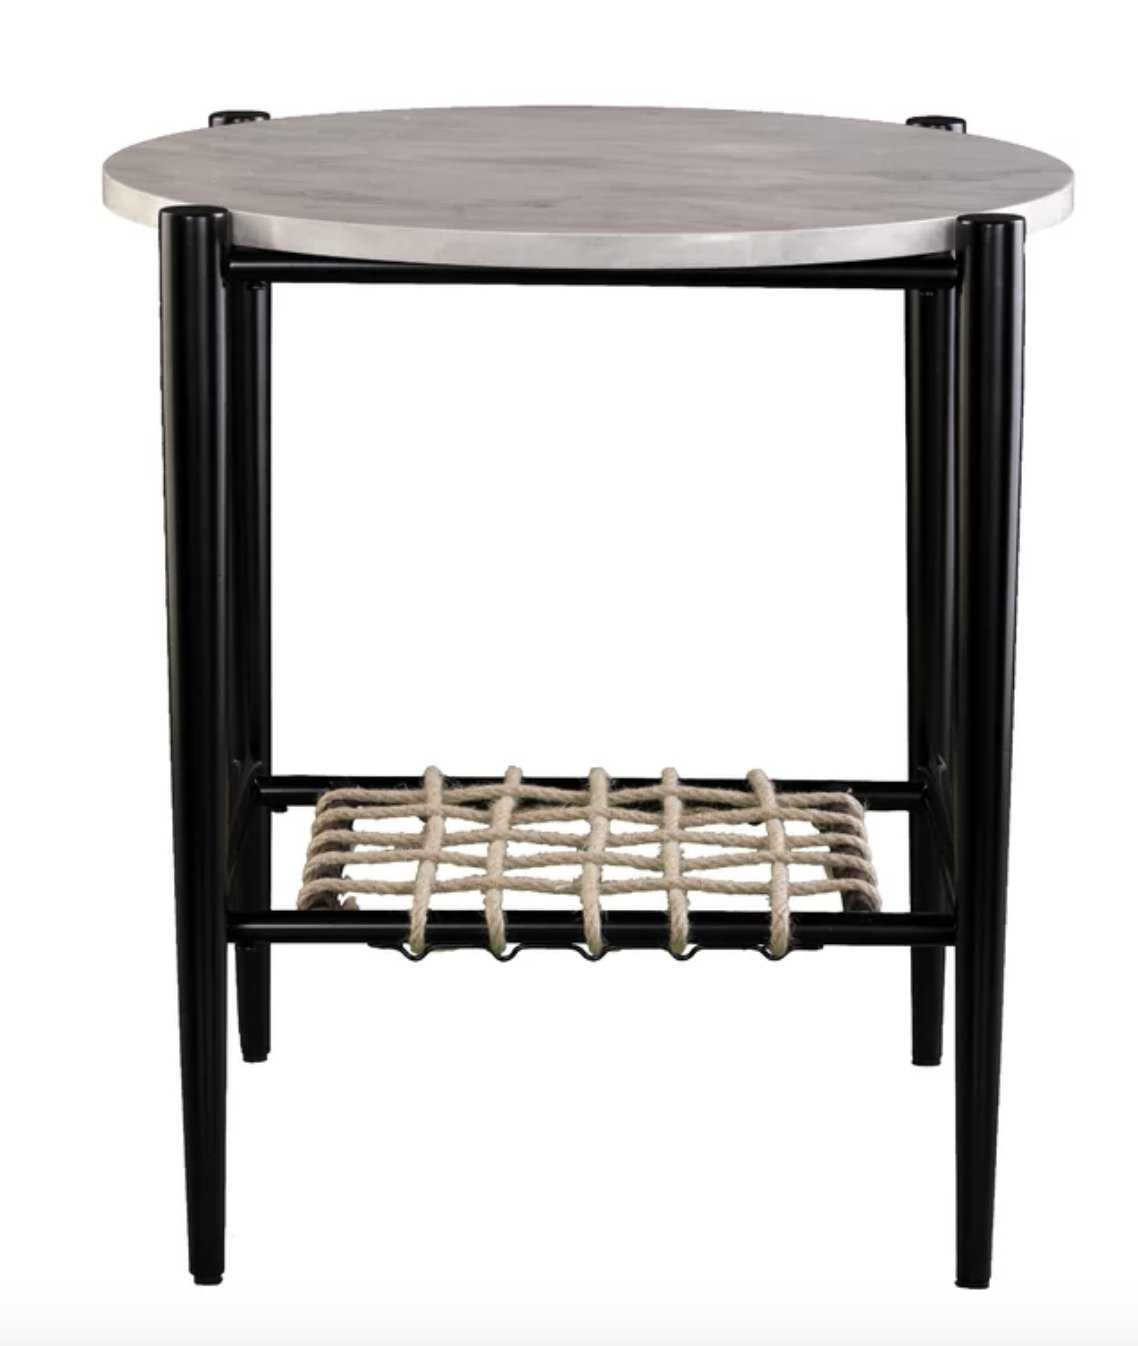 Relckin 2 Piece Coffee Table Set - Image 3